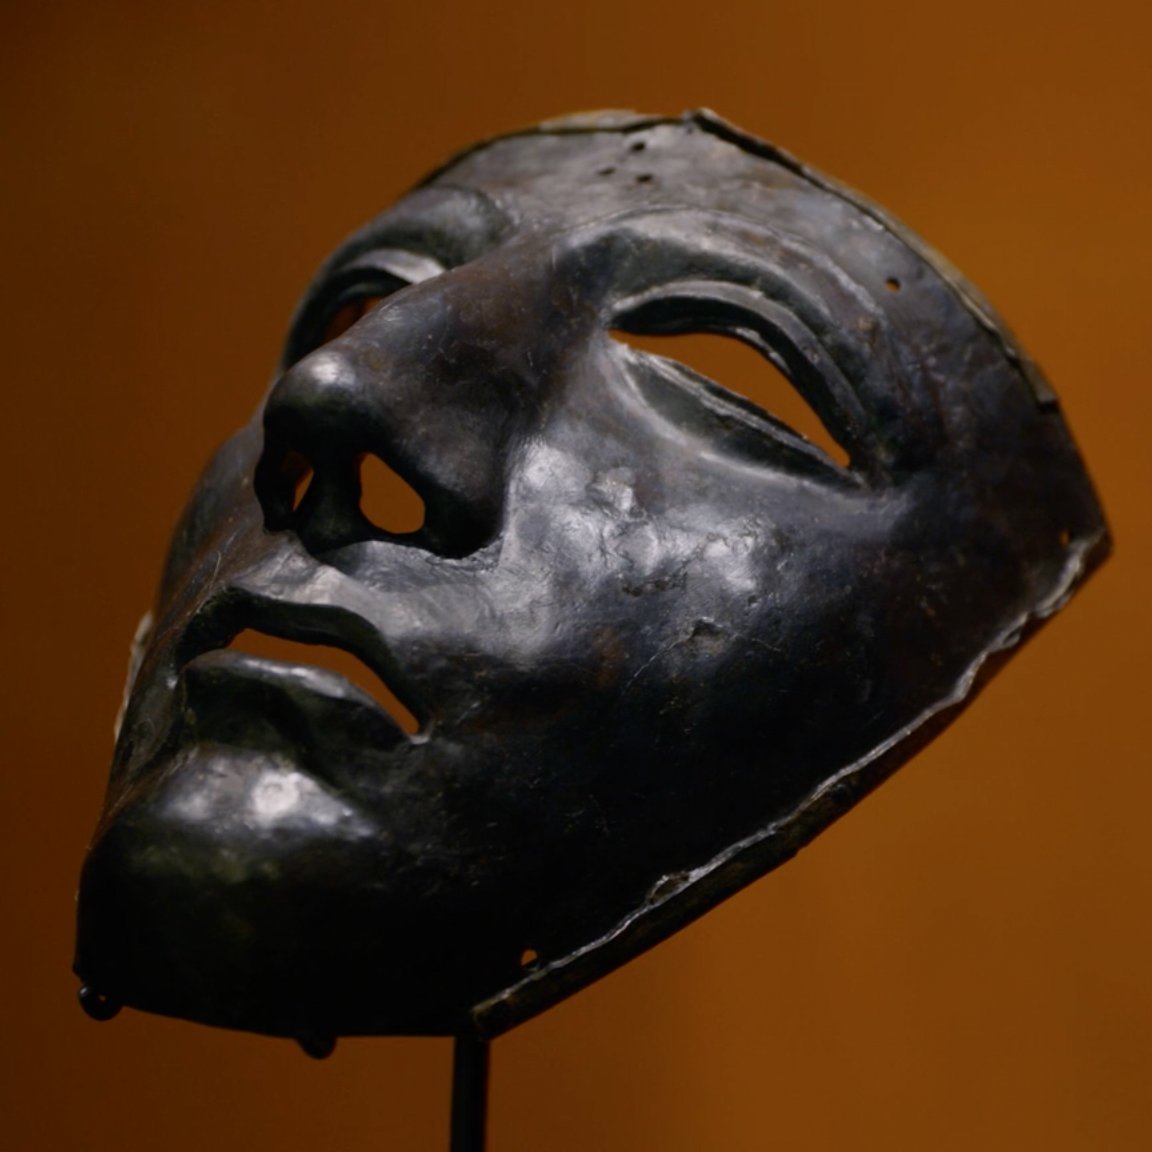 This incredible Roman cavalry mask is 2,000 years old ⚔️ It was found at the site of the Battle of the Teutoburg Forest where thousands of Roman soldiers were brutally ambushed in 9 AD. Find out more in 'Rome's Disaster: Battle of Teutoburg Forest', out now on History Hit 💥